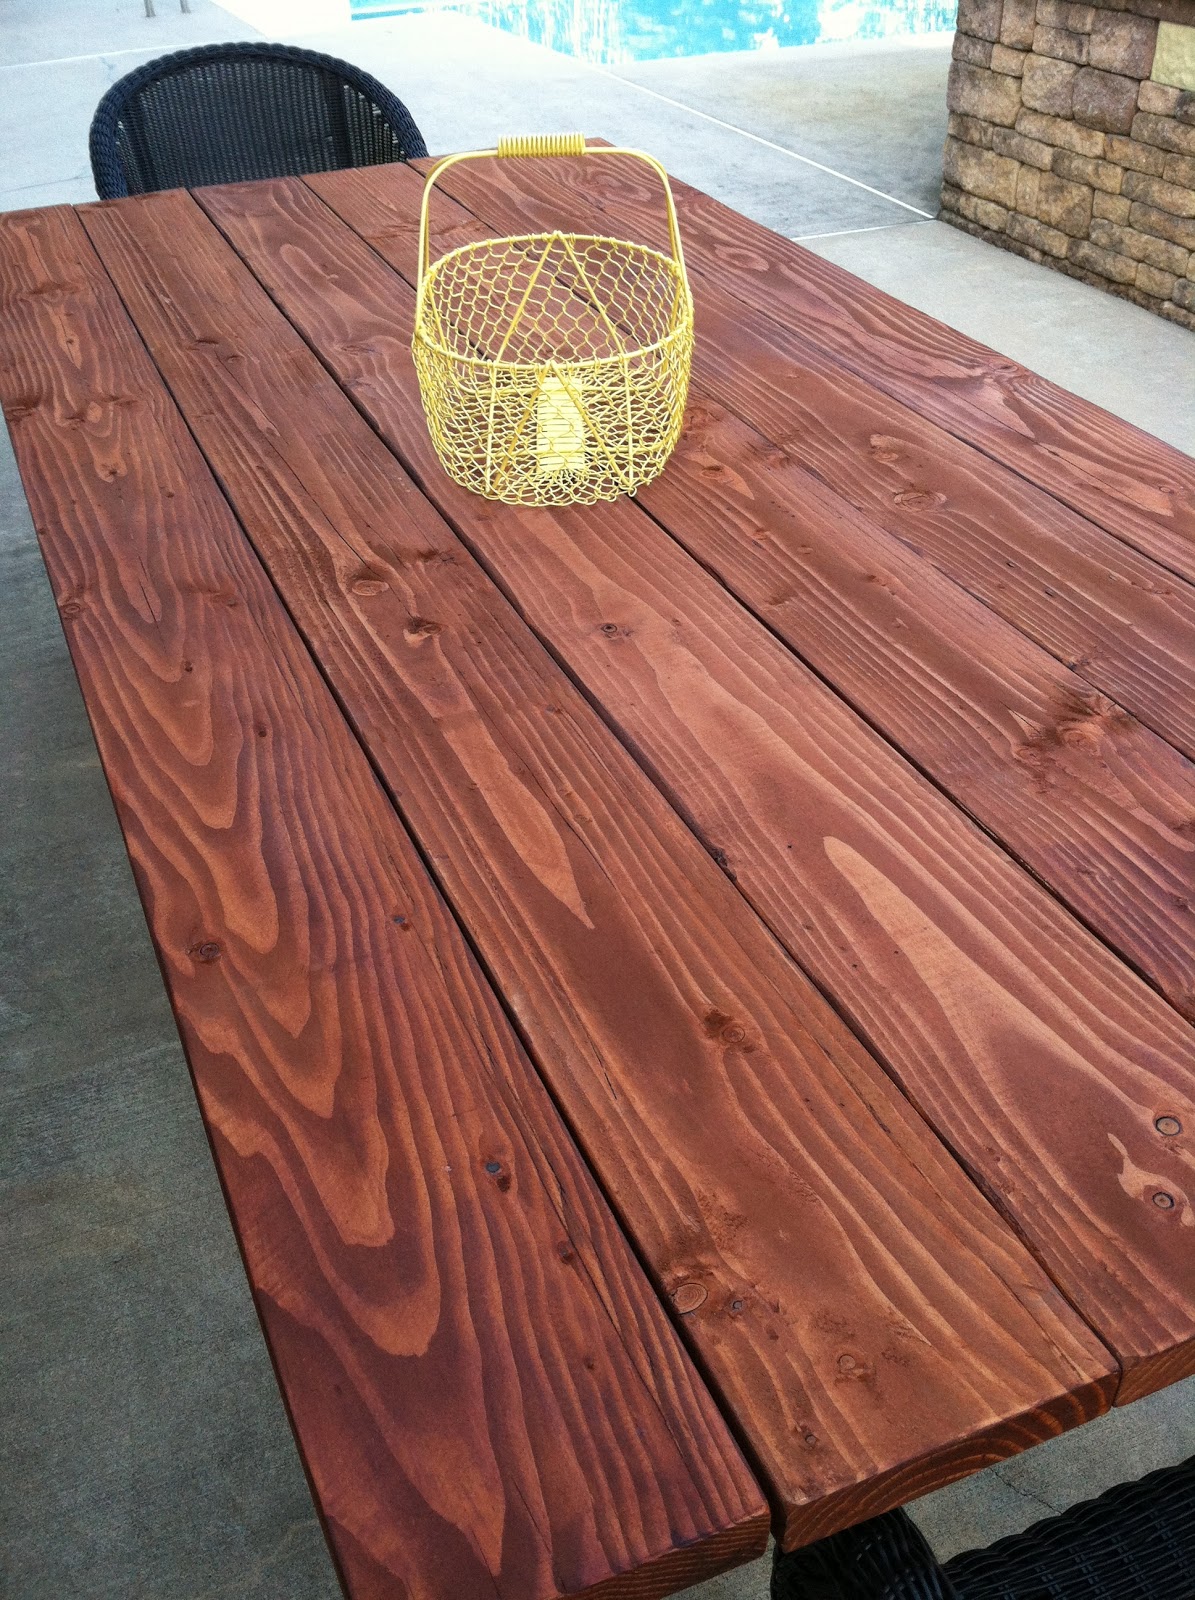 Pine Tree Home: Outdoor Farm Table: Finishing the Table Top